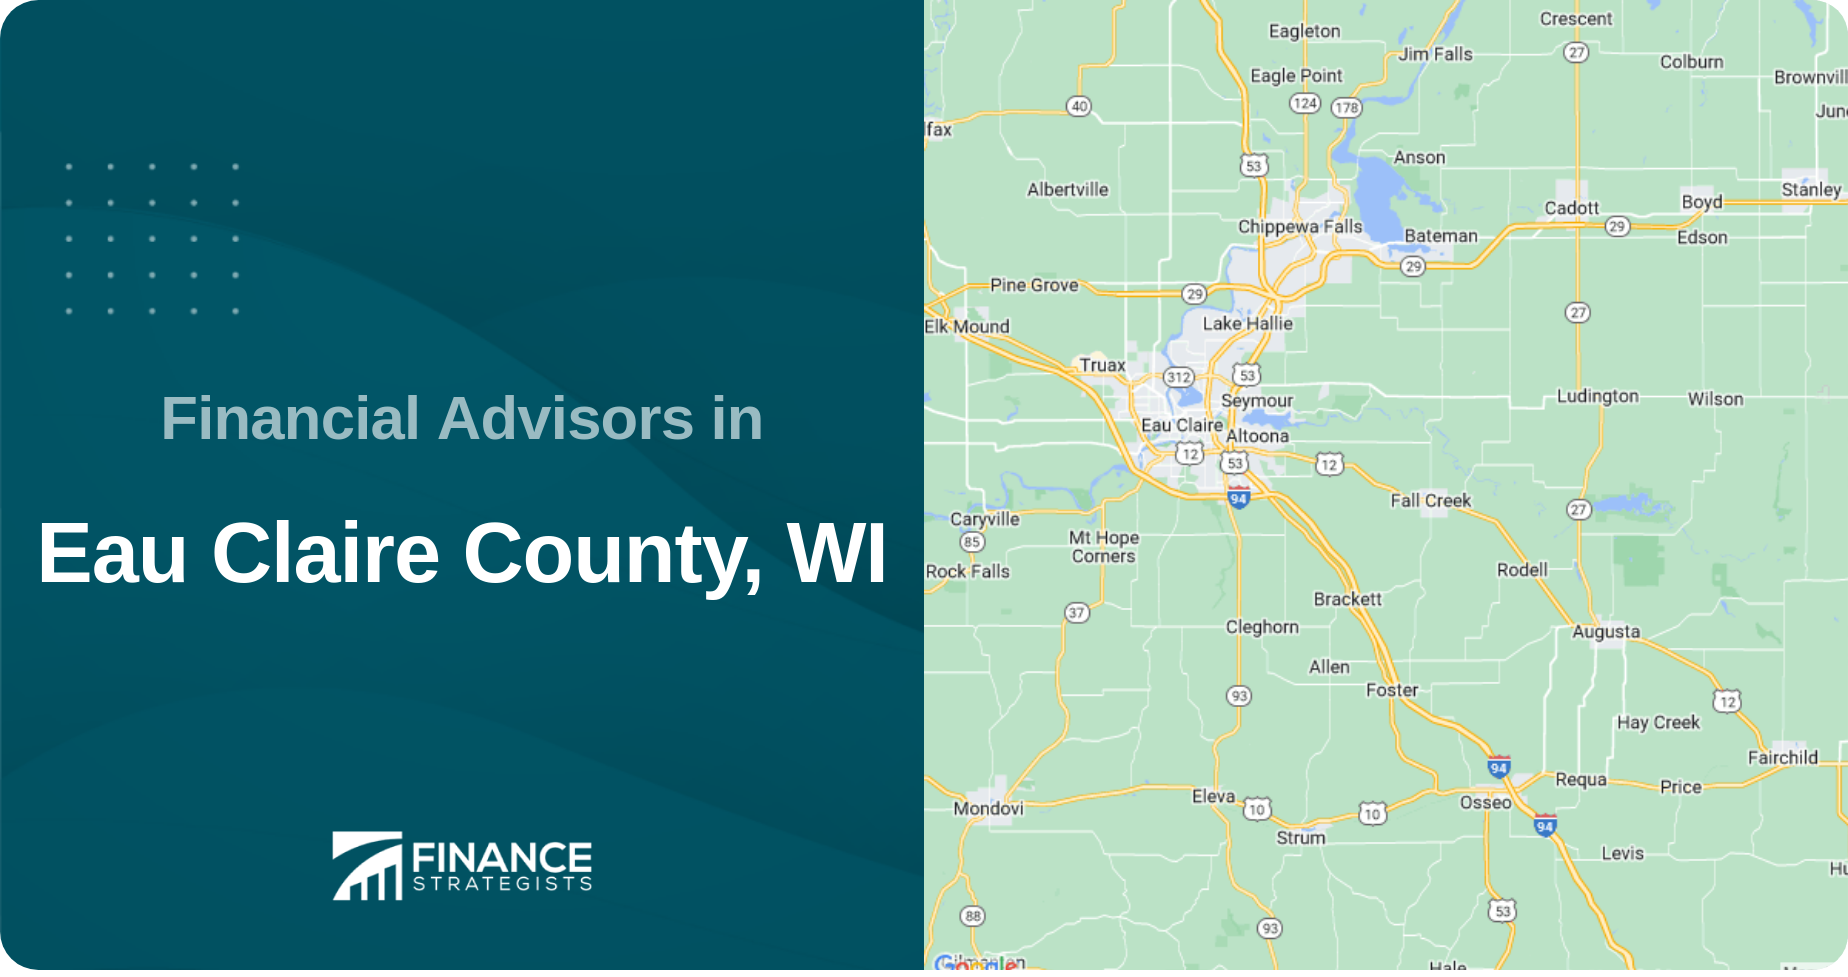 Financial Advisors in Eau Claire County, WI